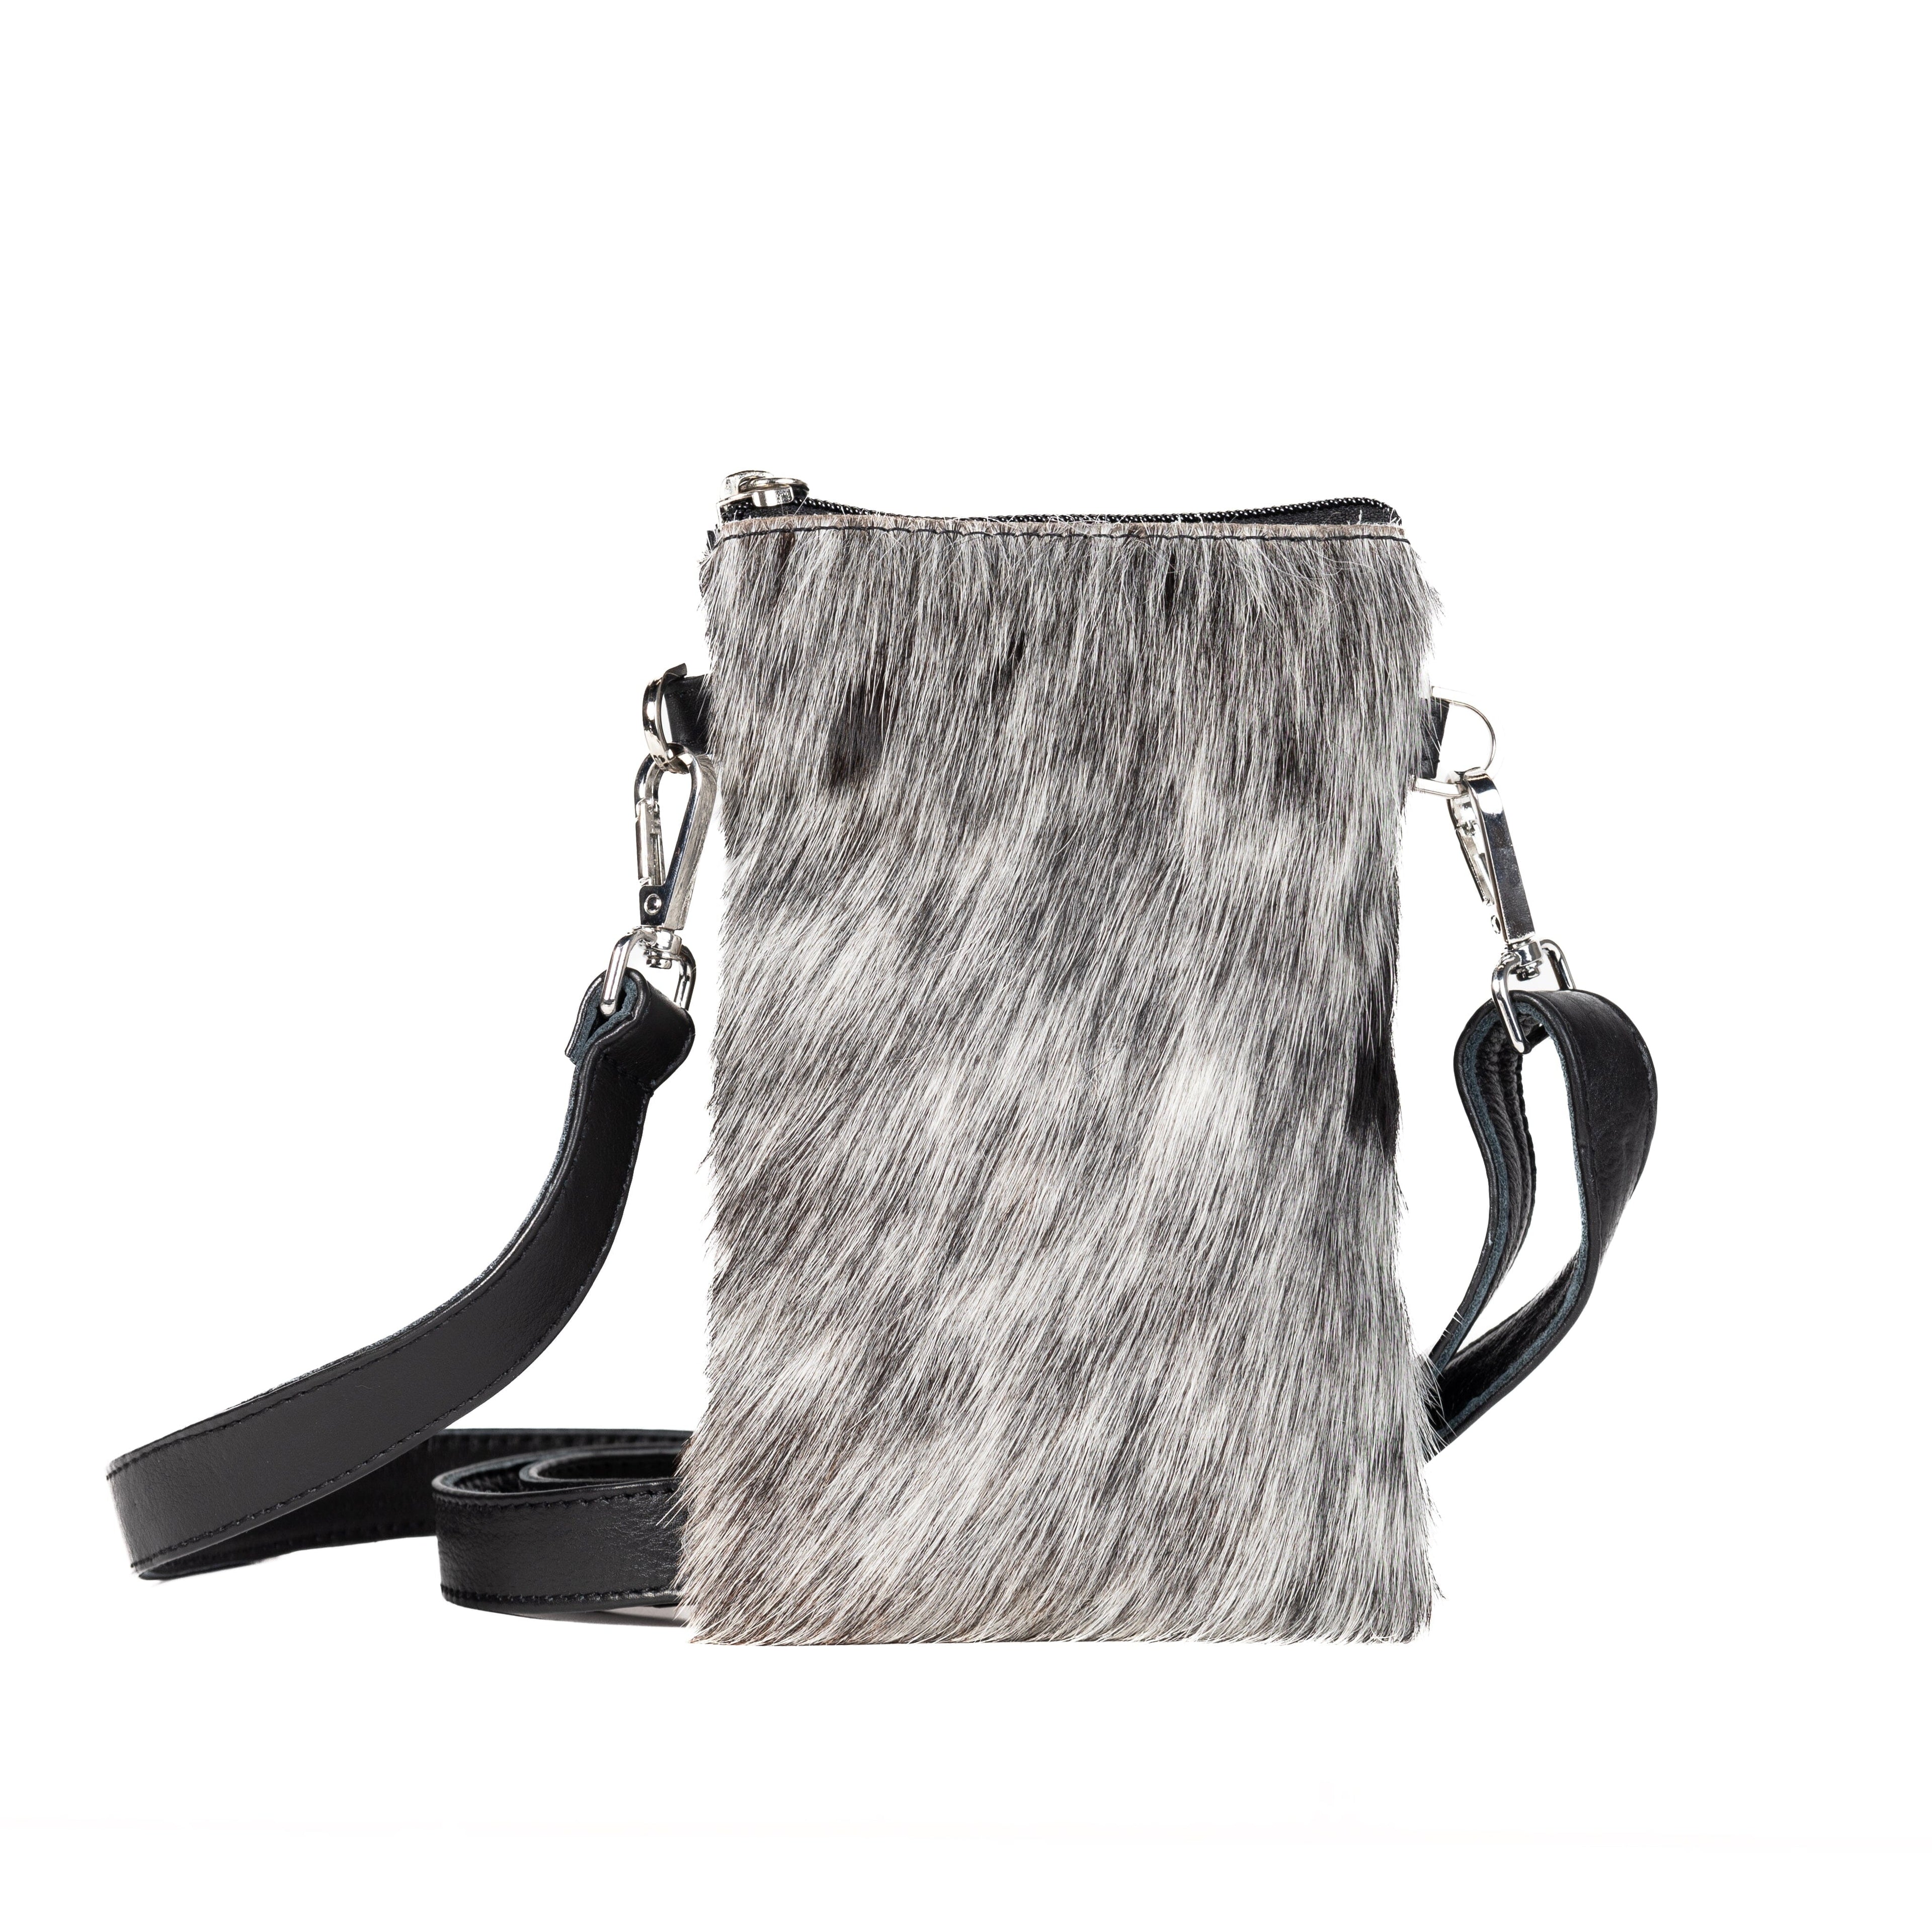 Fur Get Me Not Cowhide Phone Pouch